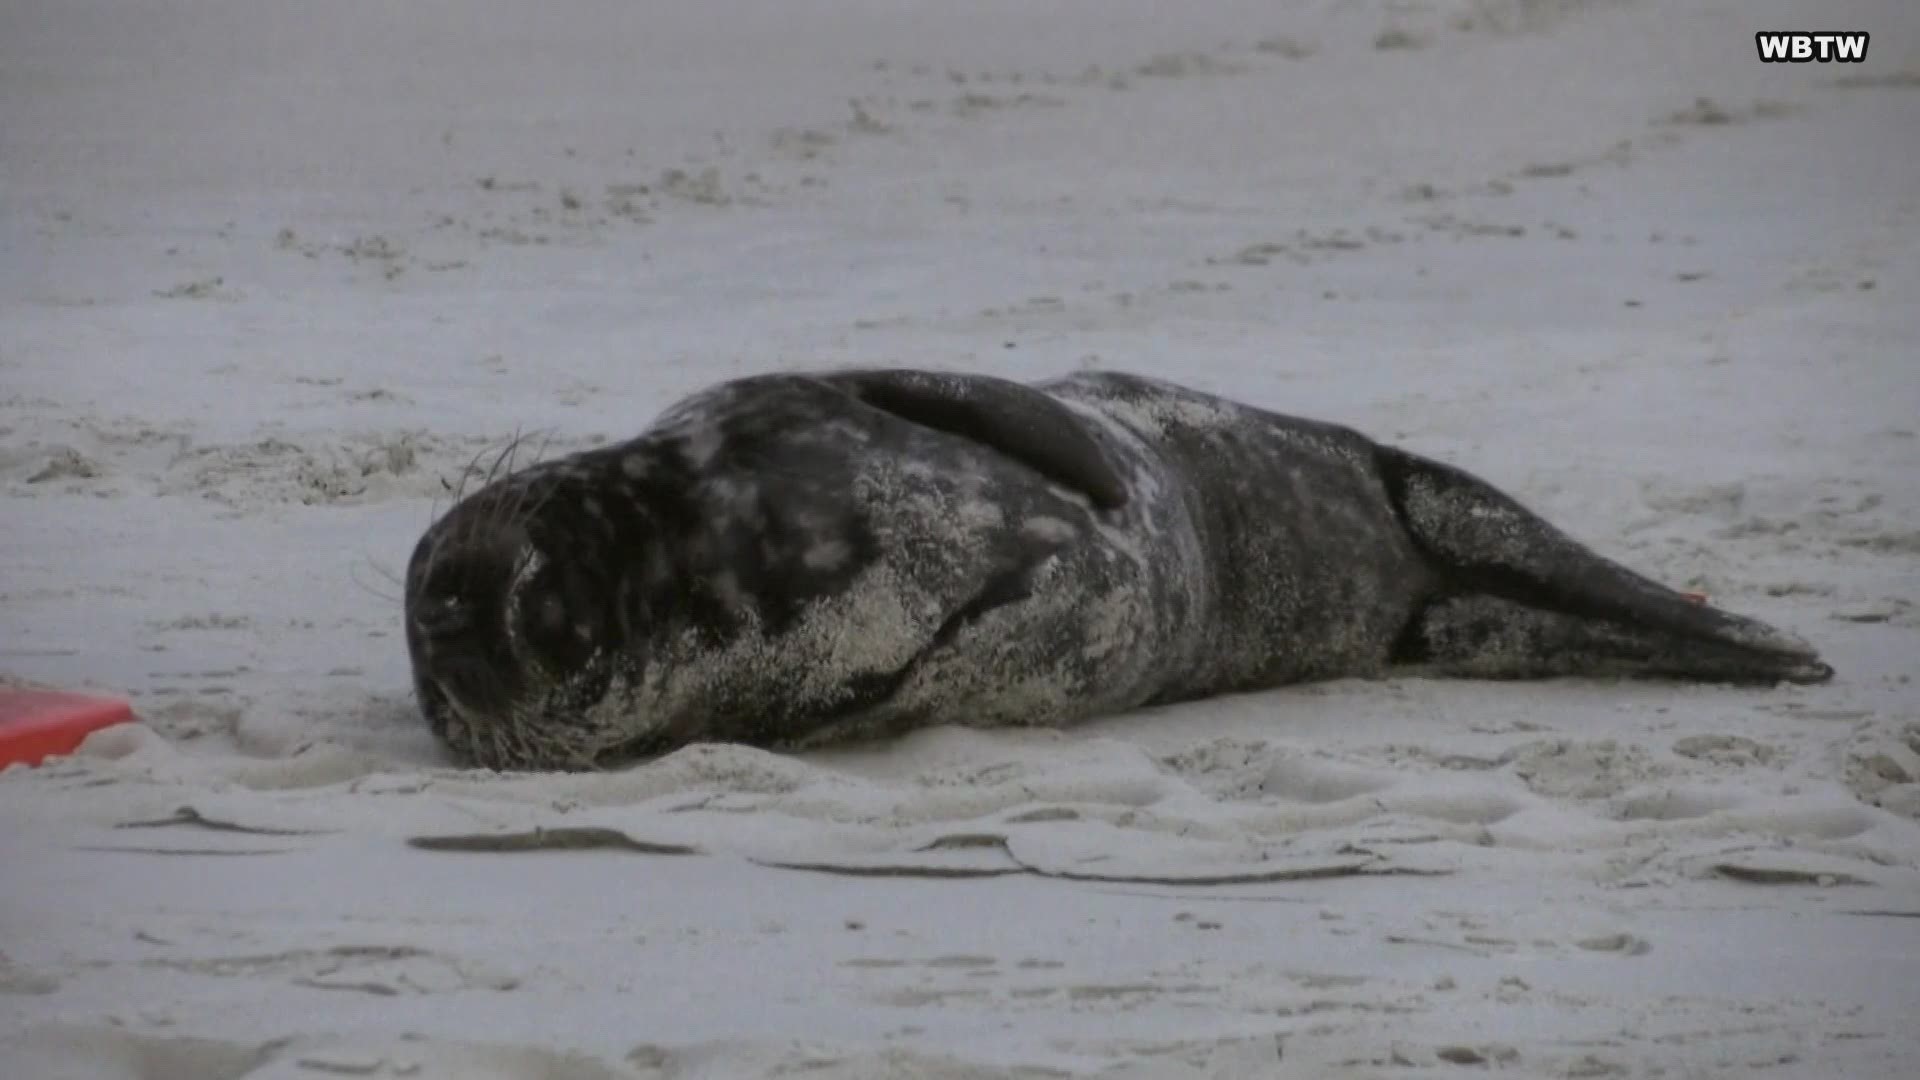 Myrtle Beach got the seal of approval from one rare  beachgoer, who like it so much, the animal spent the night.